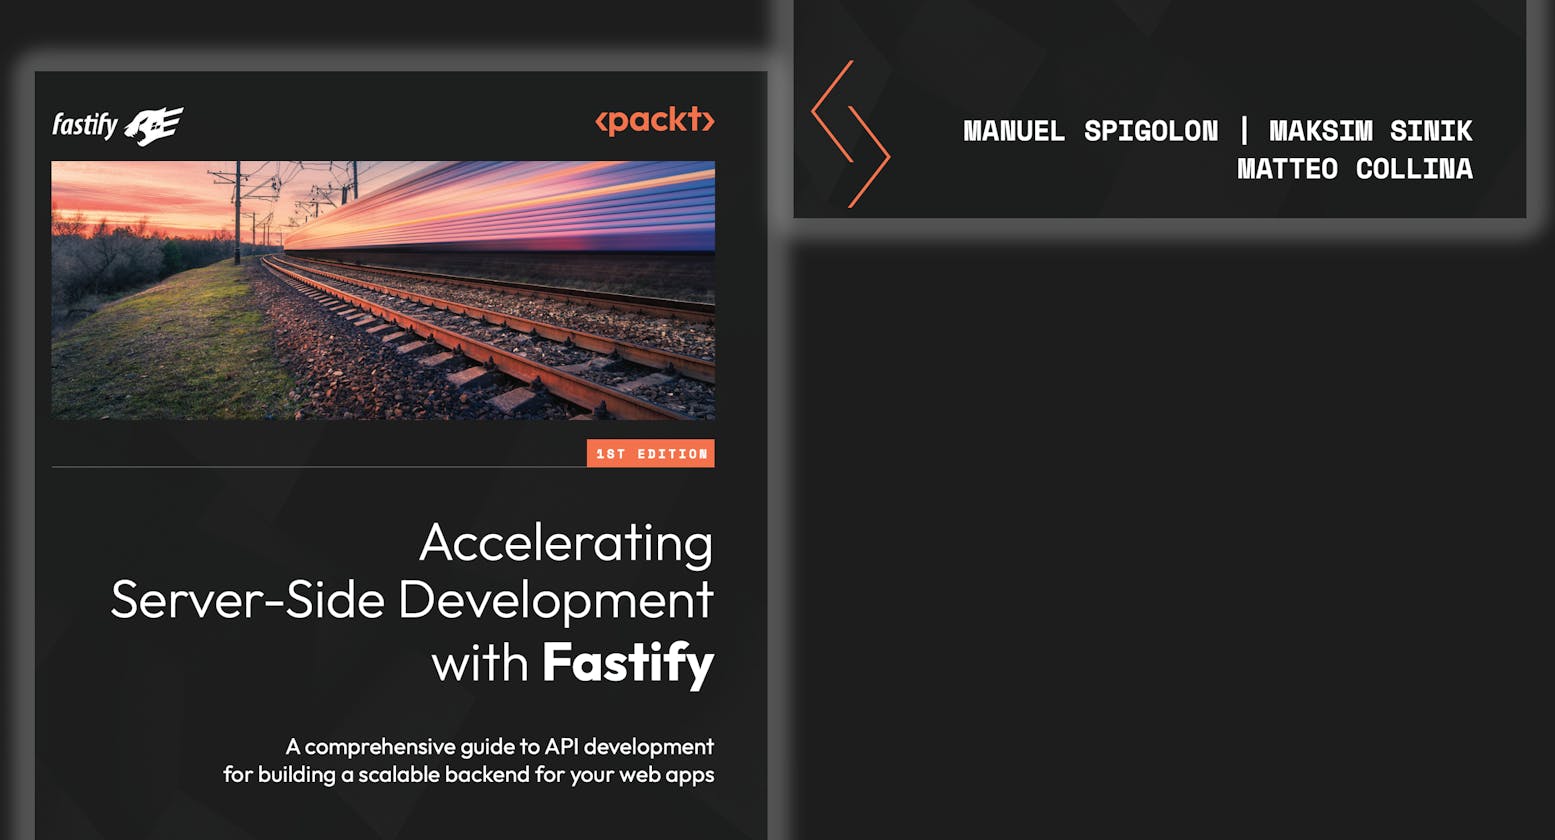 Official Release Date of 'Accelerating Server-Side Development with Fastify' Book